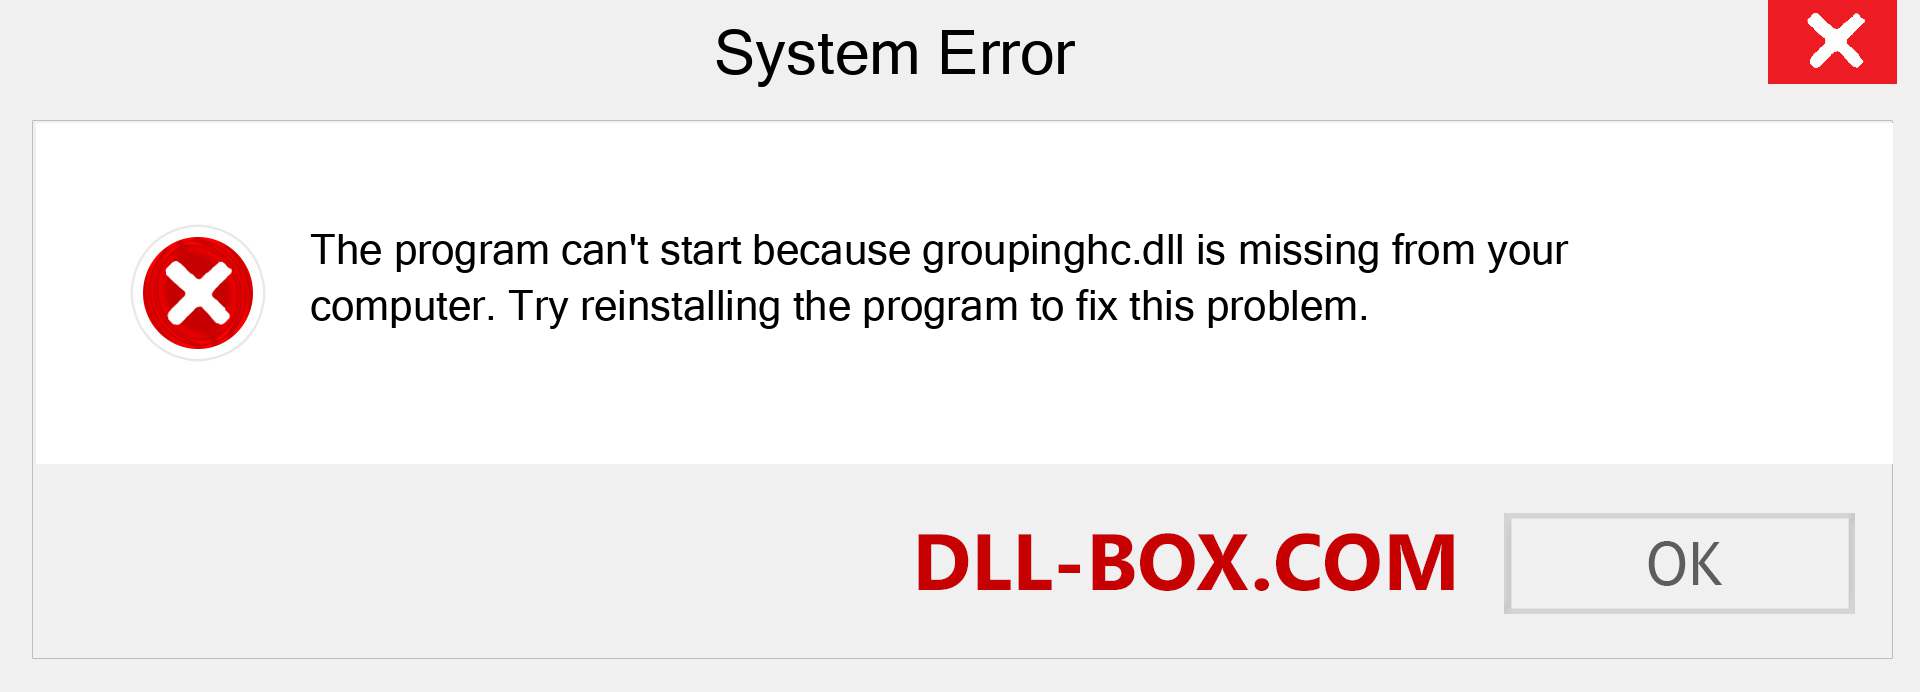  groupinghc.dll file is missing?. Download for Windows 7, 8, 10 - Fix  groupinghc dll Missing Error on Windows, photos, images